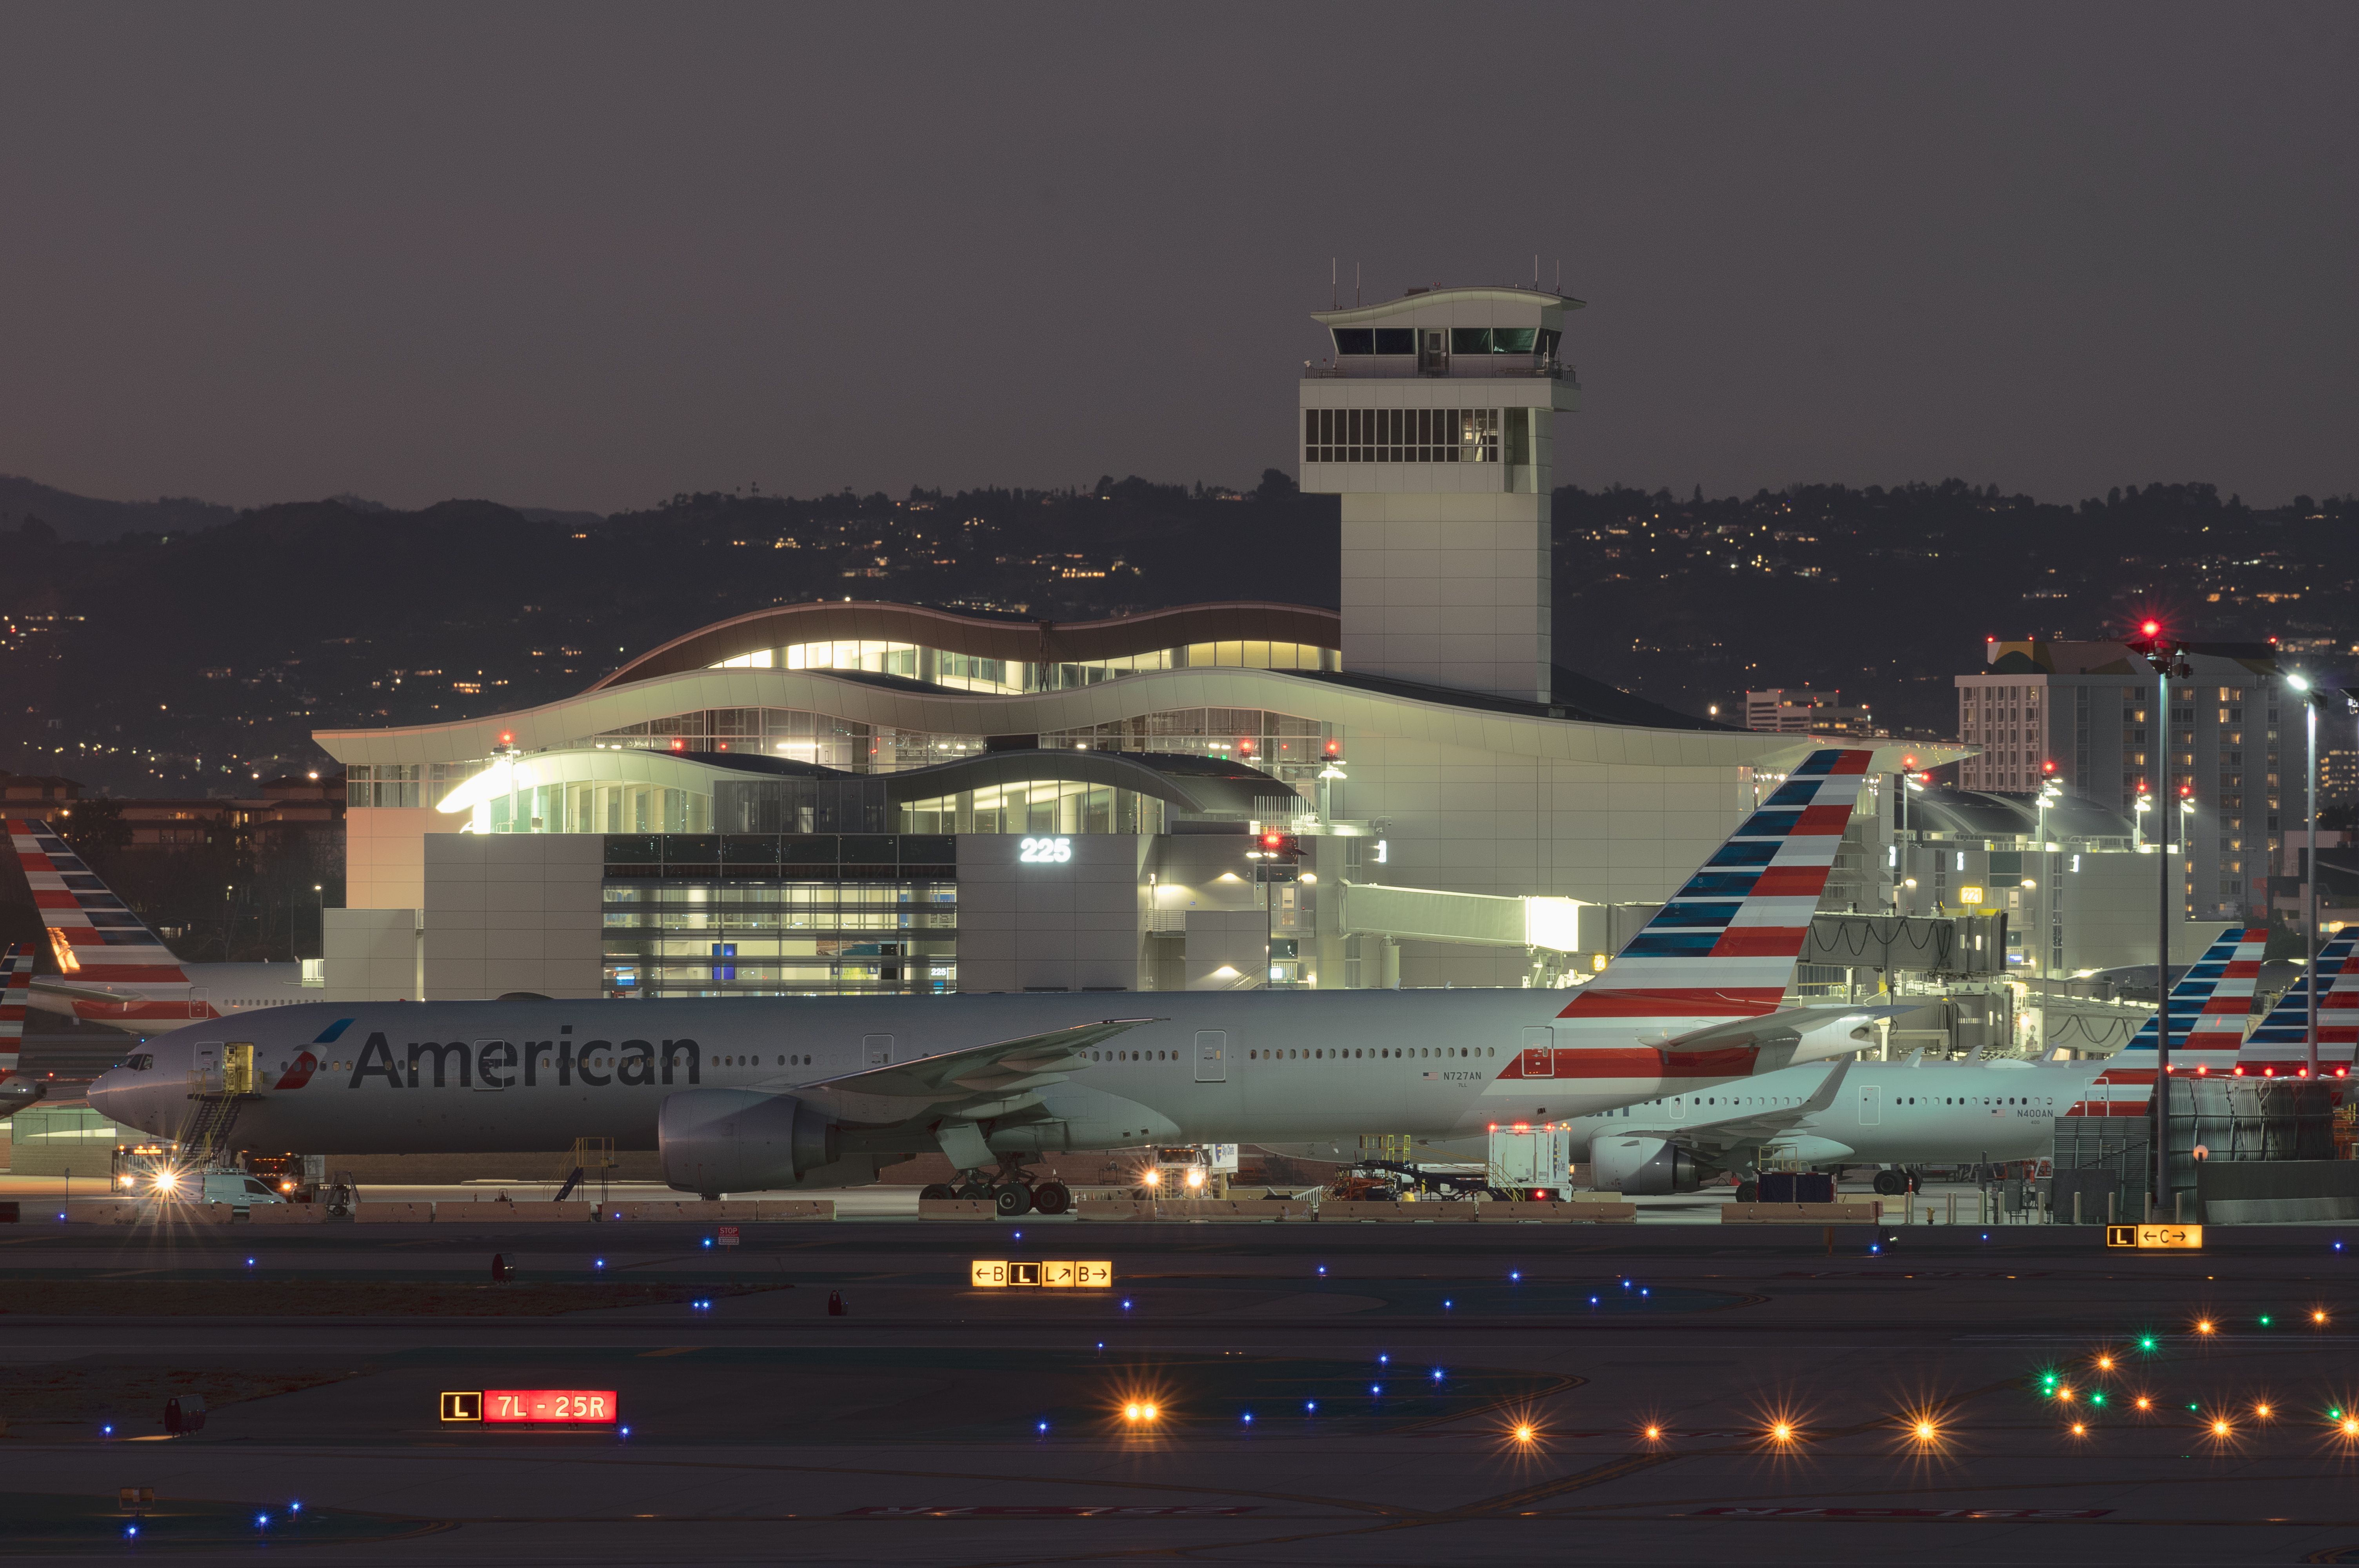 An American Airlines aircraft on the apron at Los Angeles International Airport Early In the Morning.